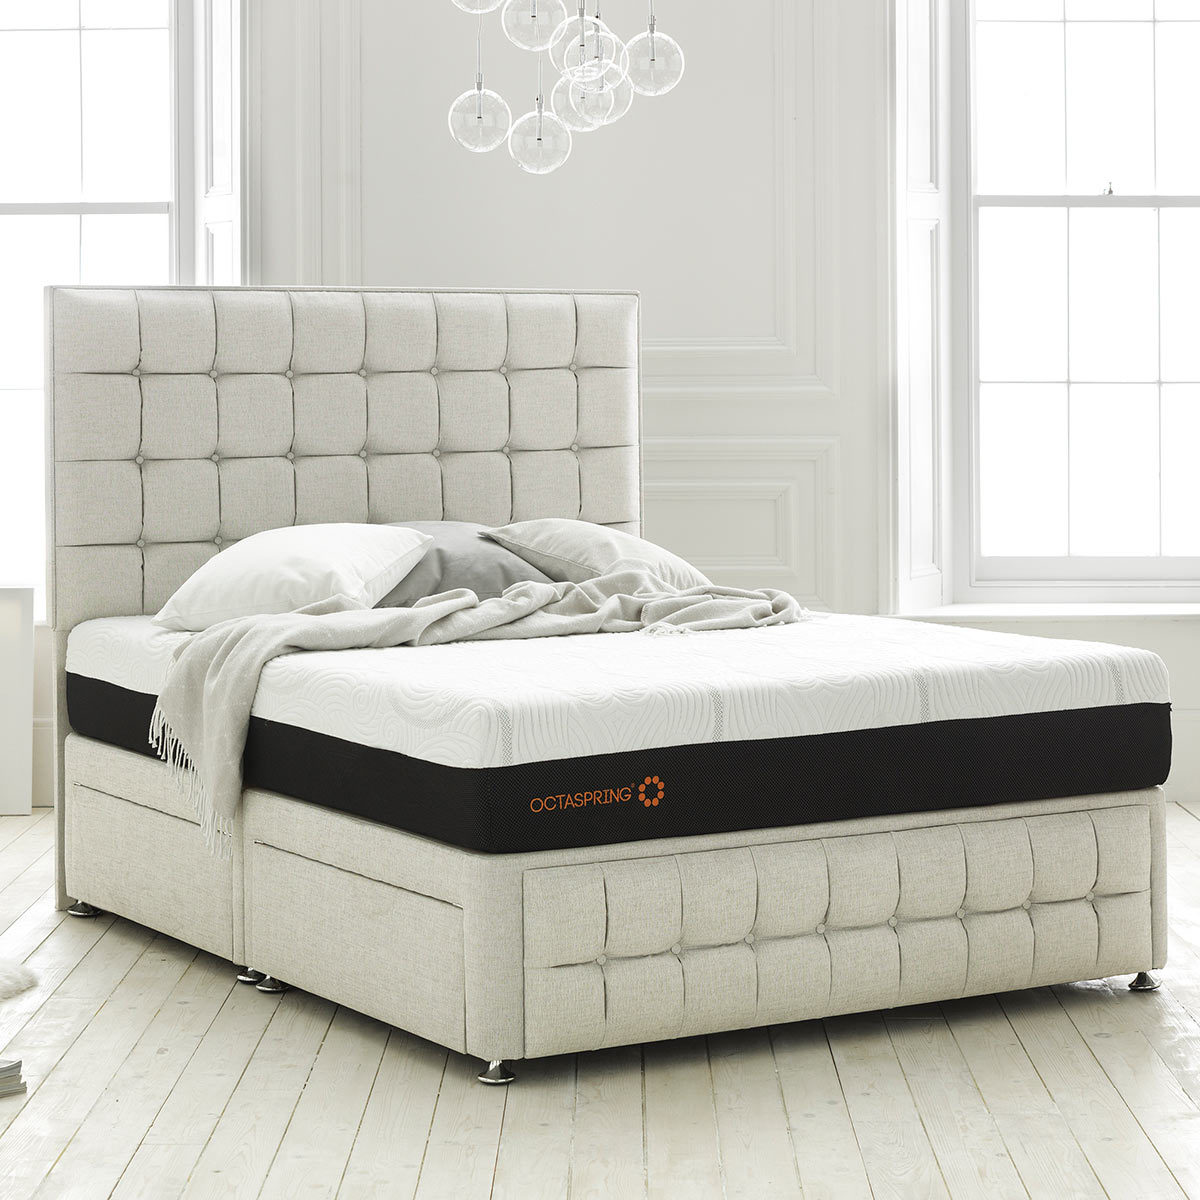 Octaspring Sirocco Mattress and Venice Divan with Headboard in White Sand, King